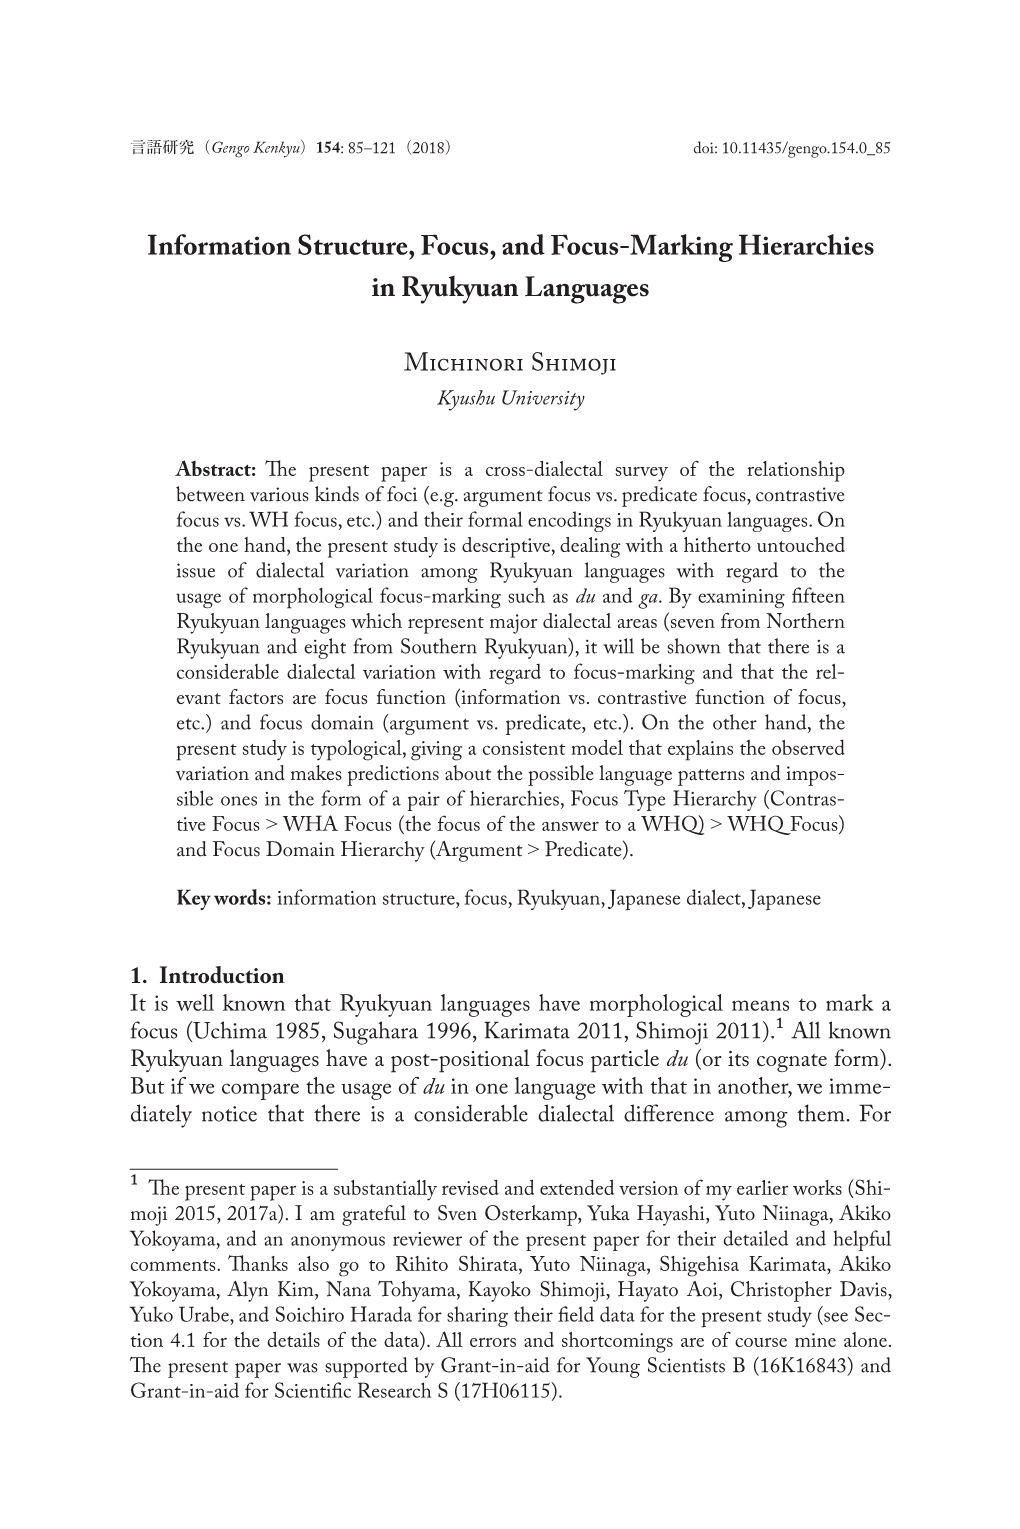 Information Structure, Focus, and Focus-Marking Hierarchies in Ryukyuan Languages